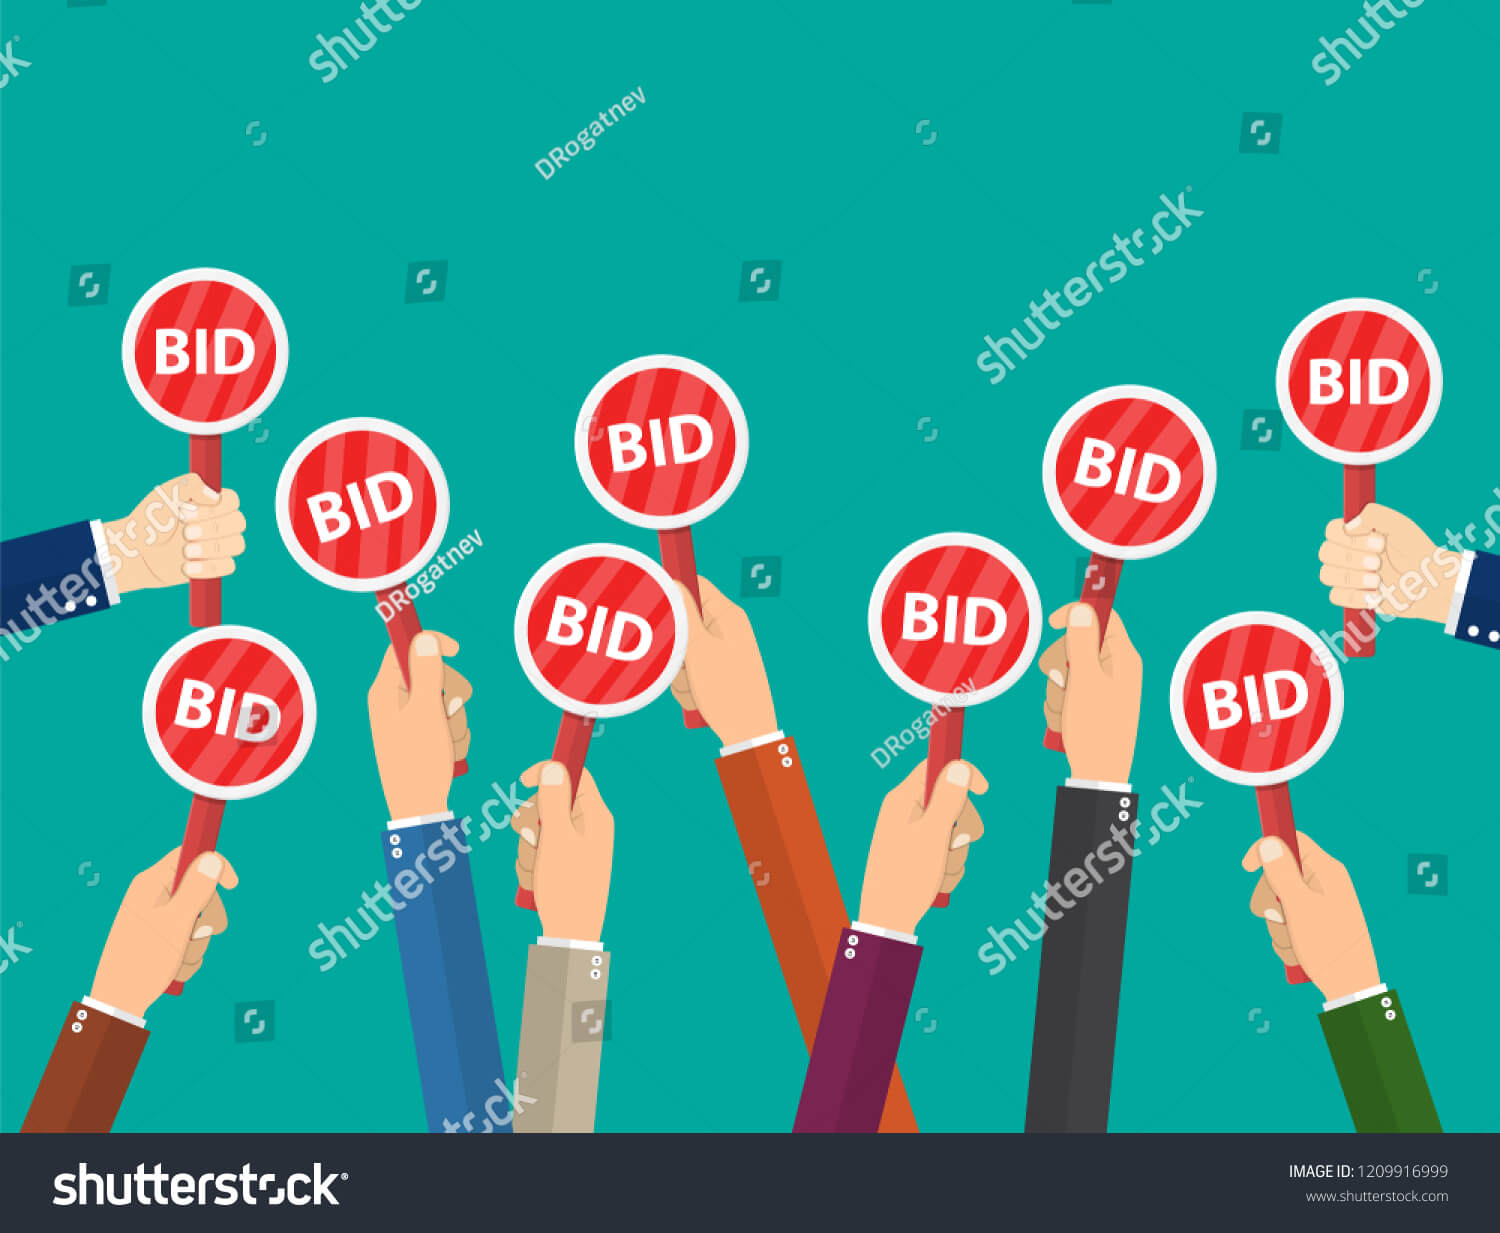 Hand Hold Paddle Bid Auction Meeting Stock Illustration Inside Auction Bid Cards Template